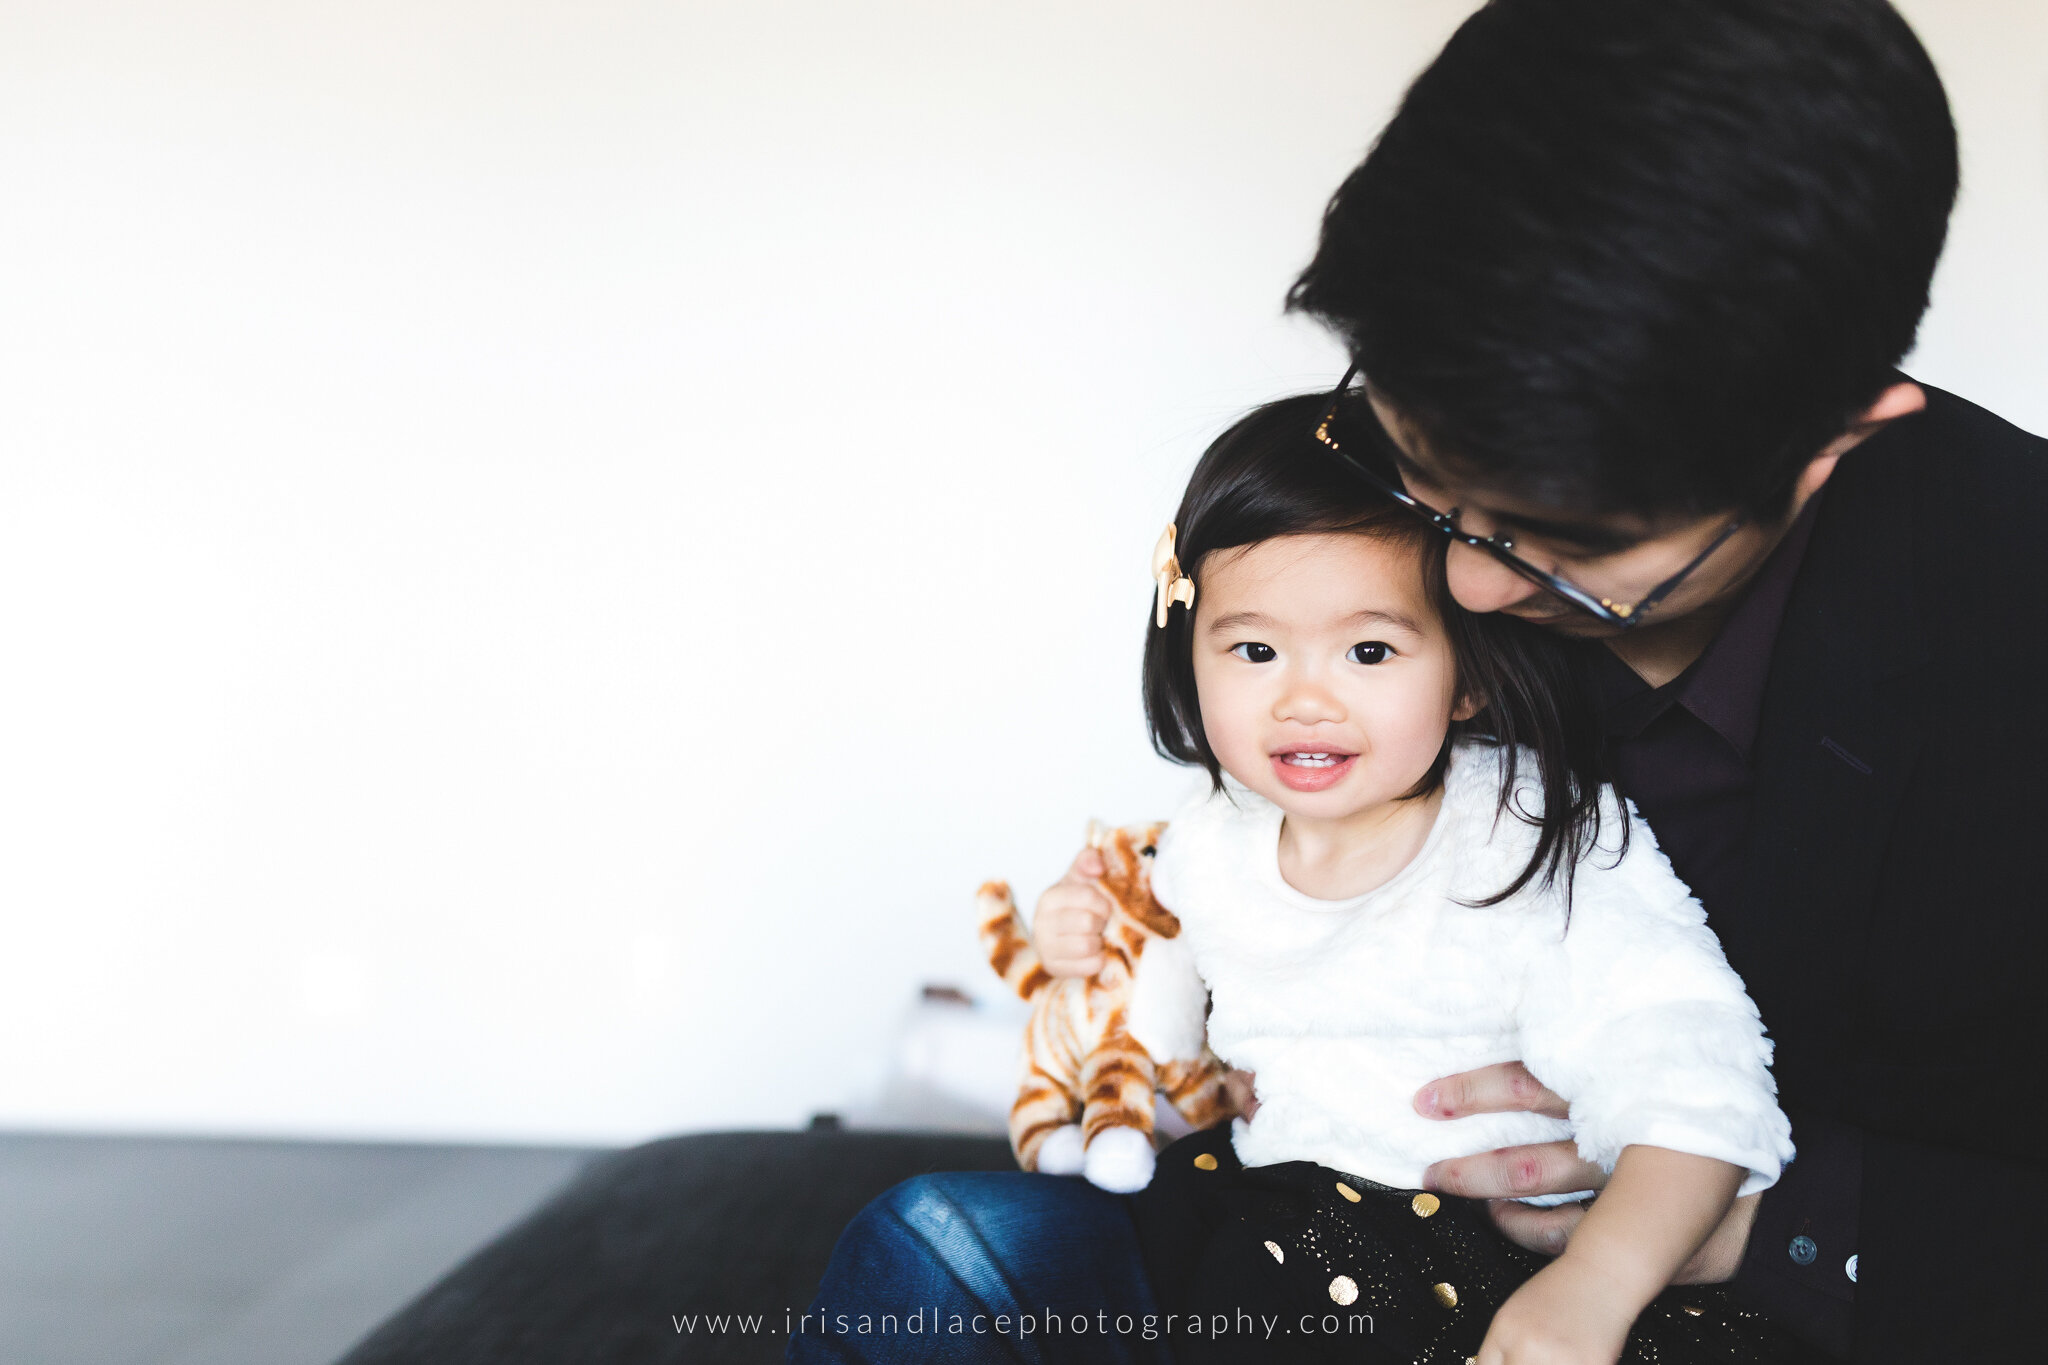 Menlo Park Lifestyle Family Photography  |  Iris and Lace Photography  |  Northern California Photographer